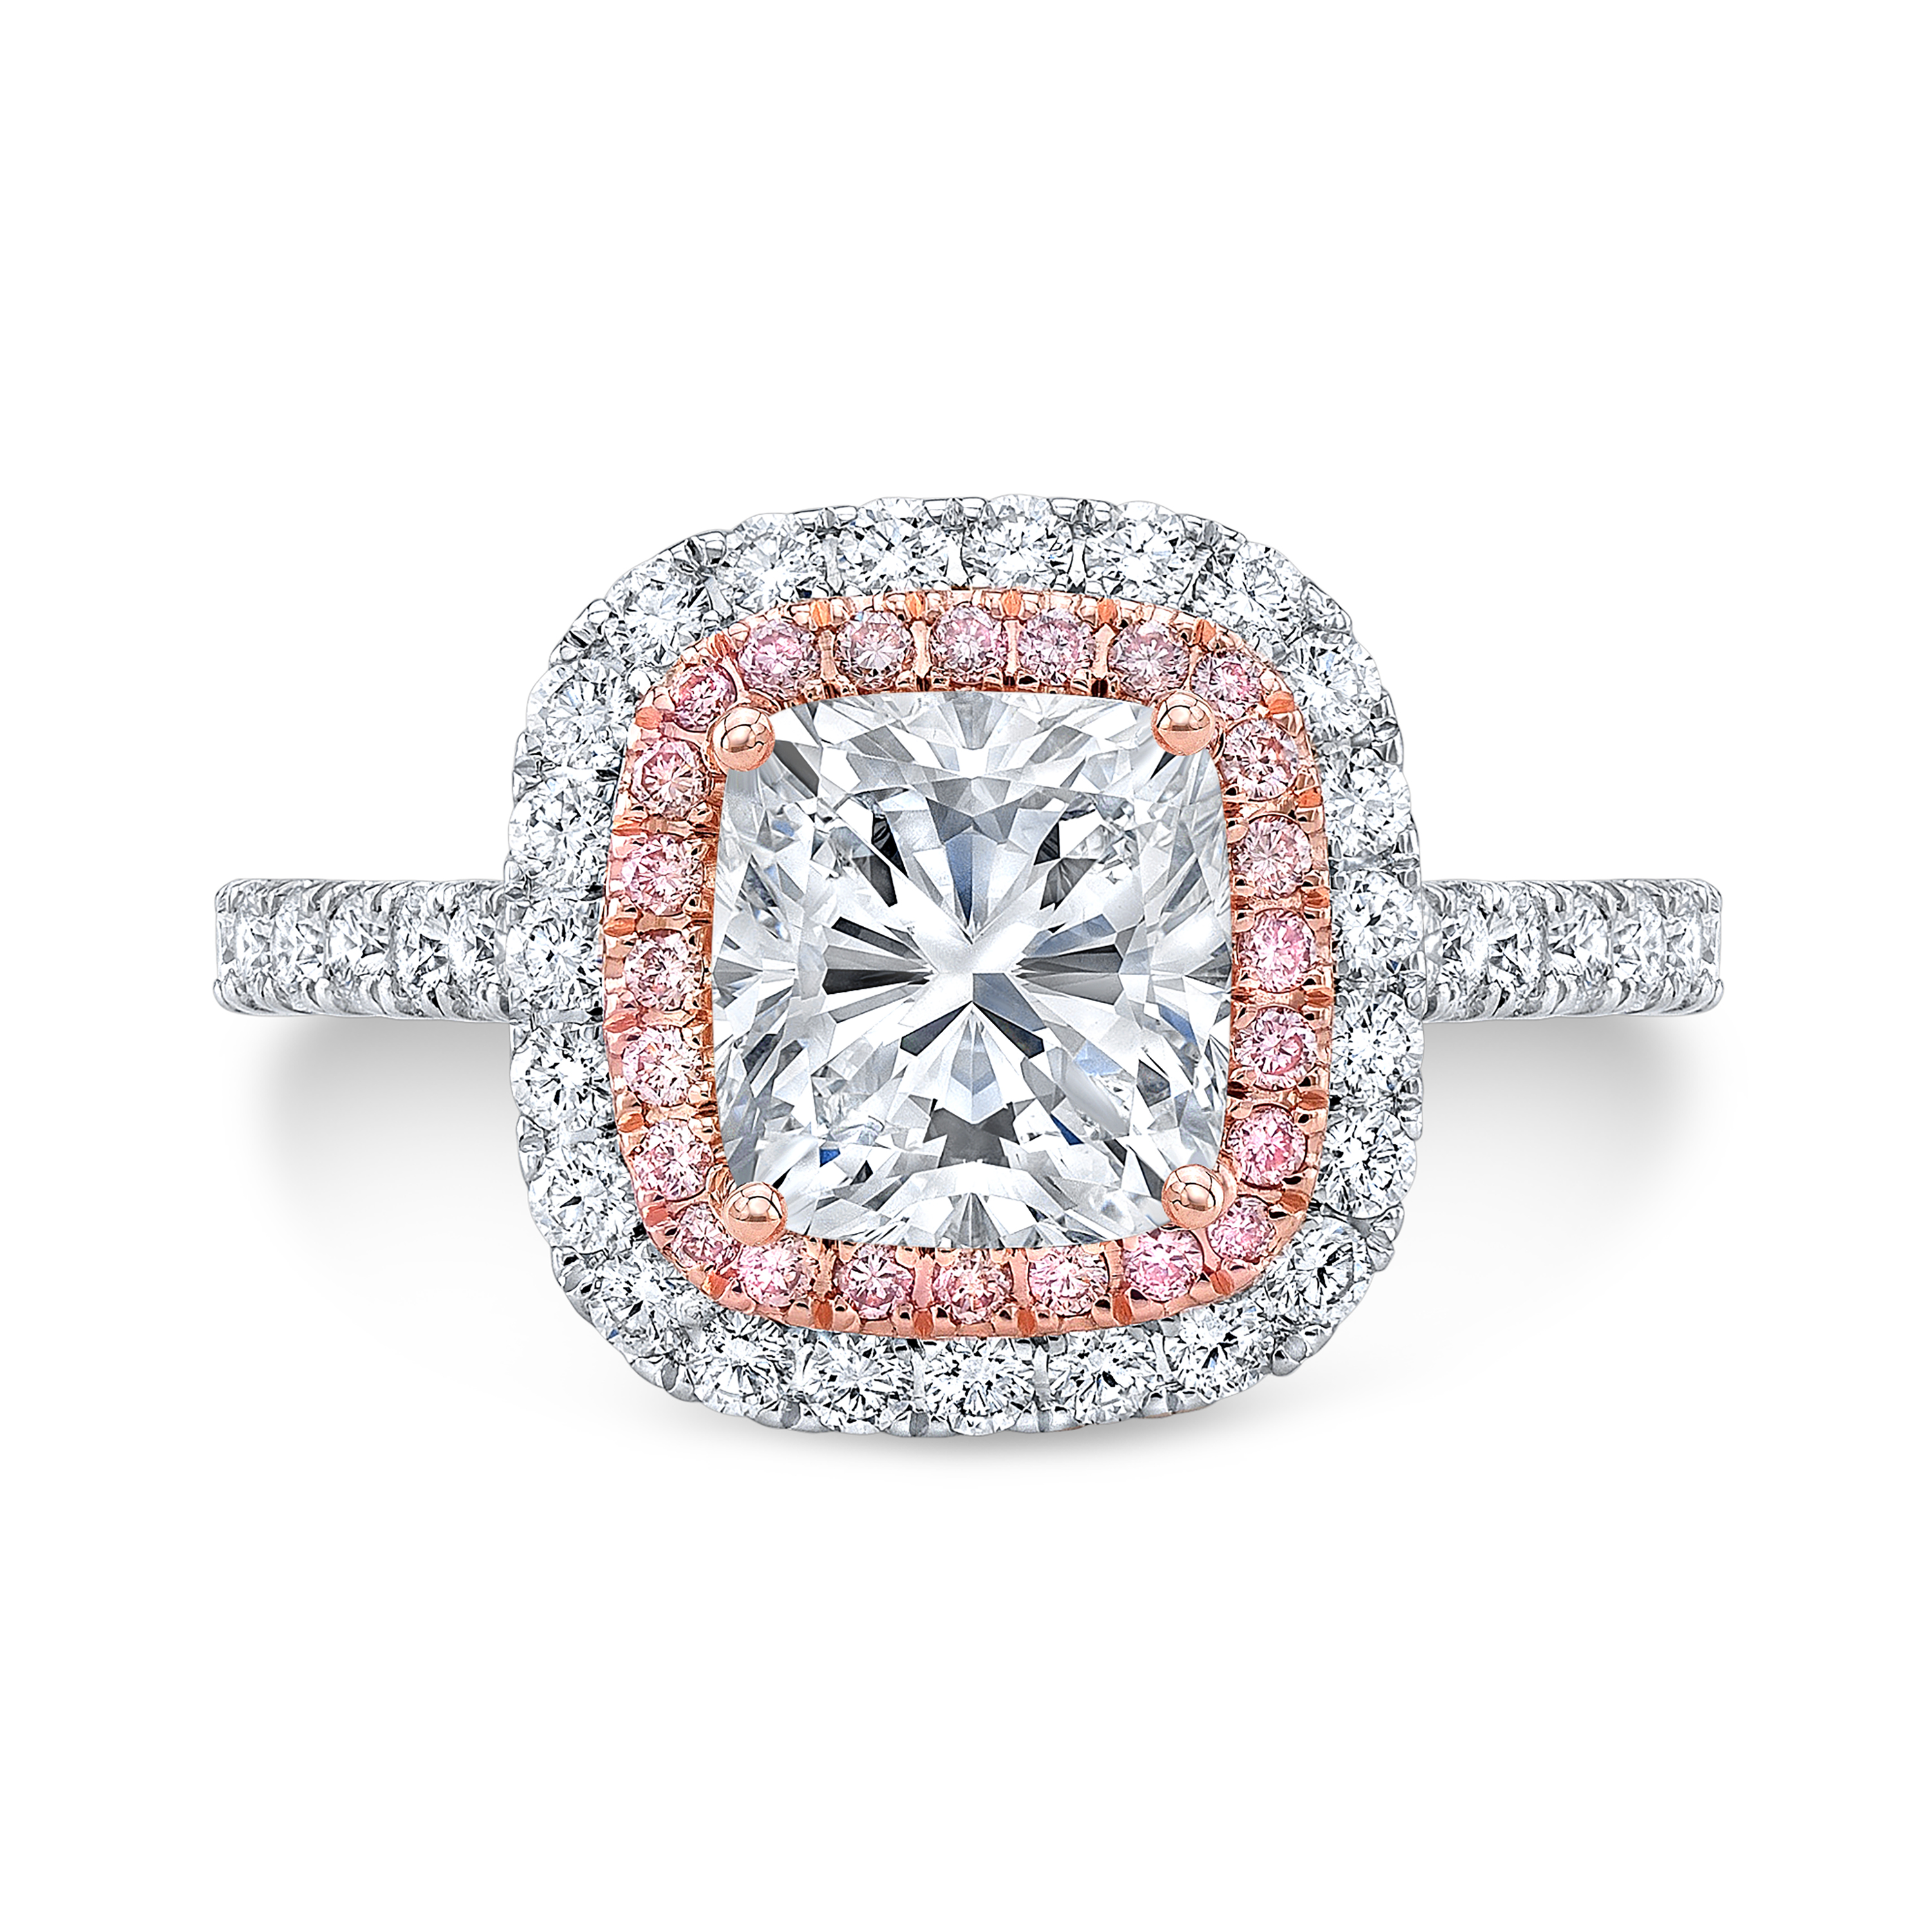 SPARKLING PINK DIAMONDS…So Good, She Was Blown Away